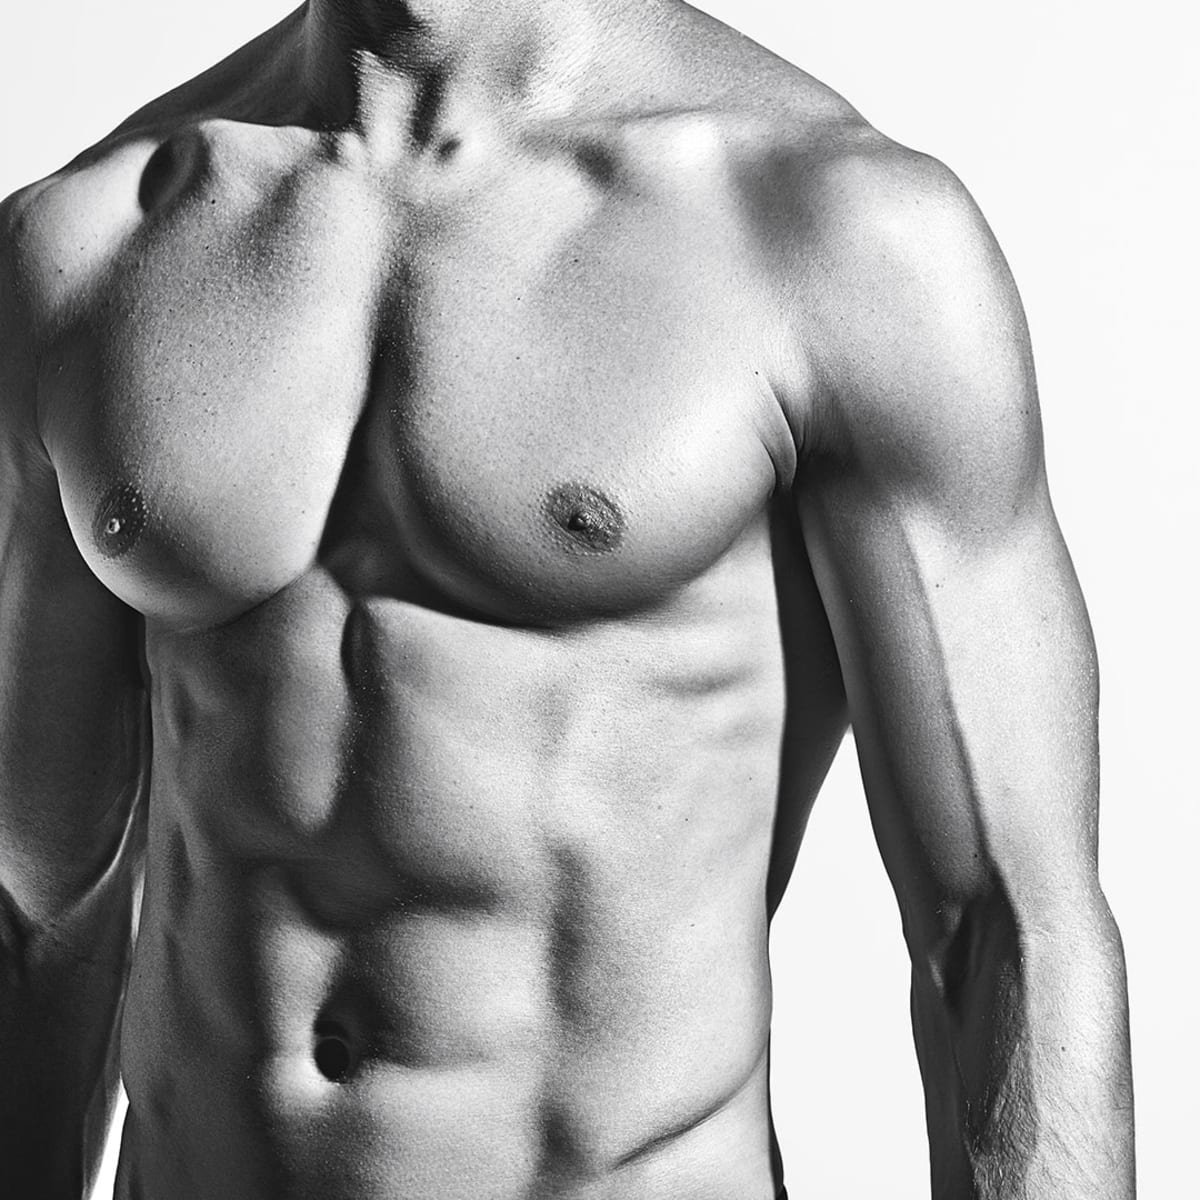 How to Build an Attractive Physique